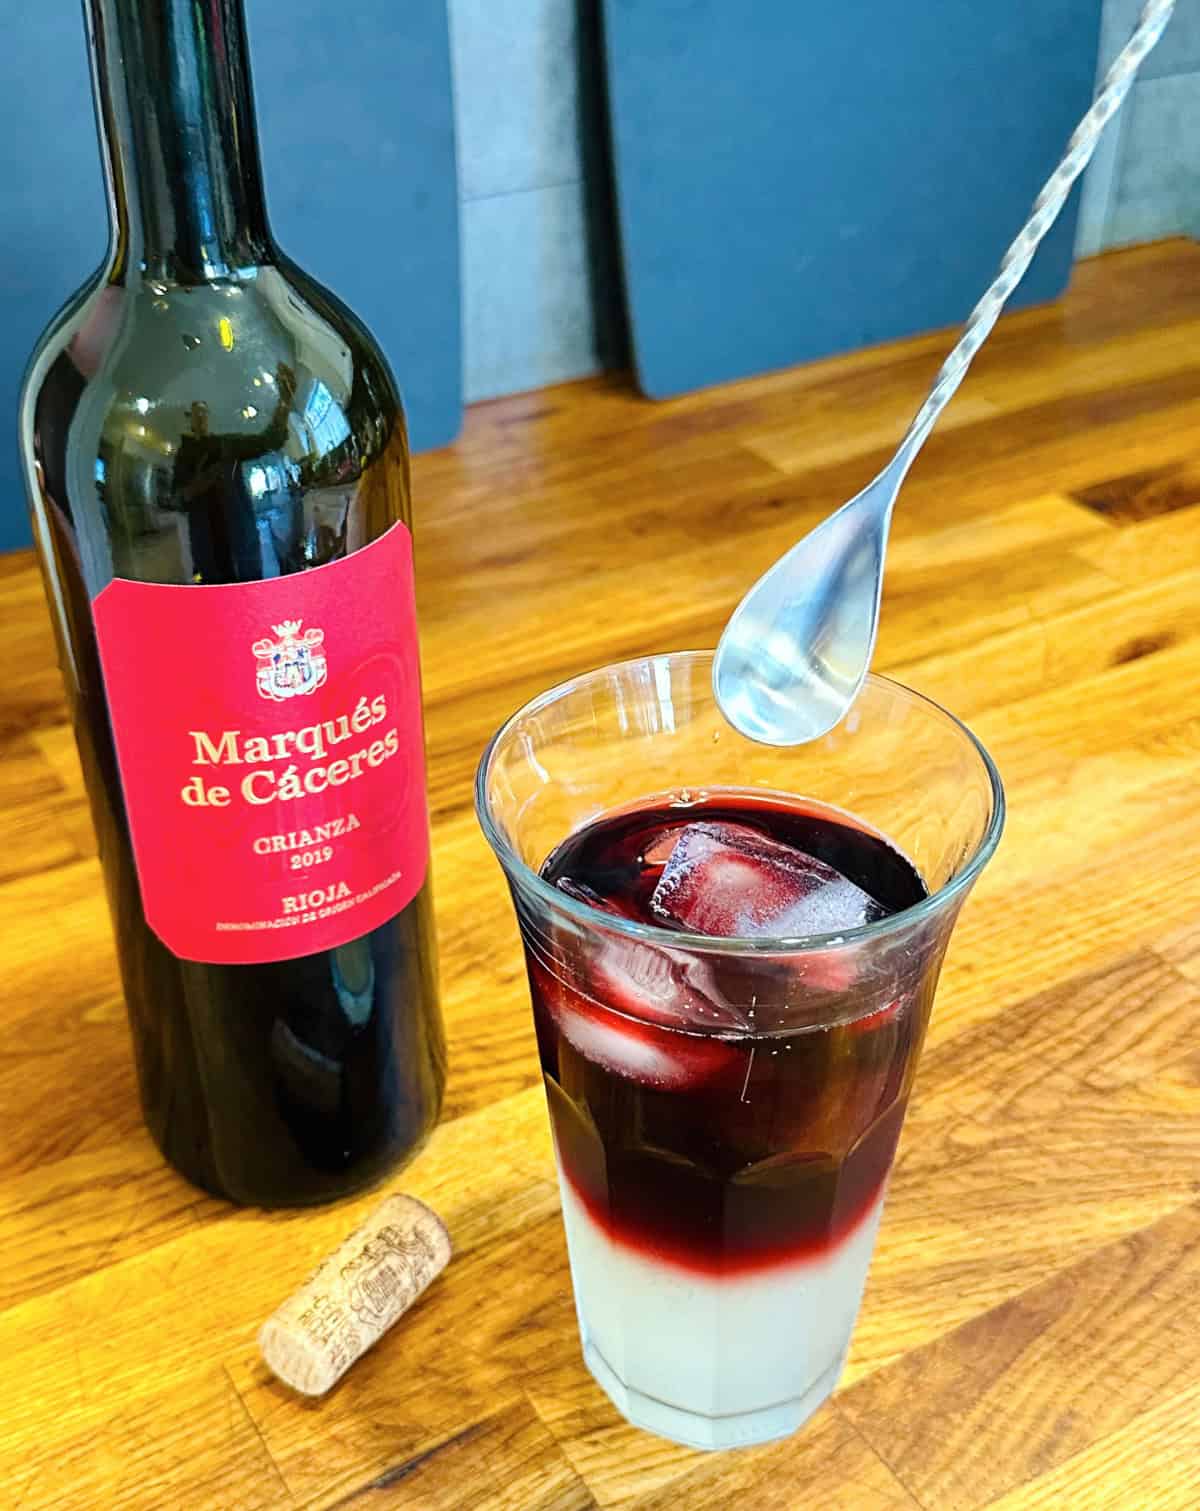 Long steel spoon held over tall glass containing red wine, lemon soda, and ice next to a bottle of wine with a red label and a cork.